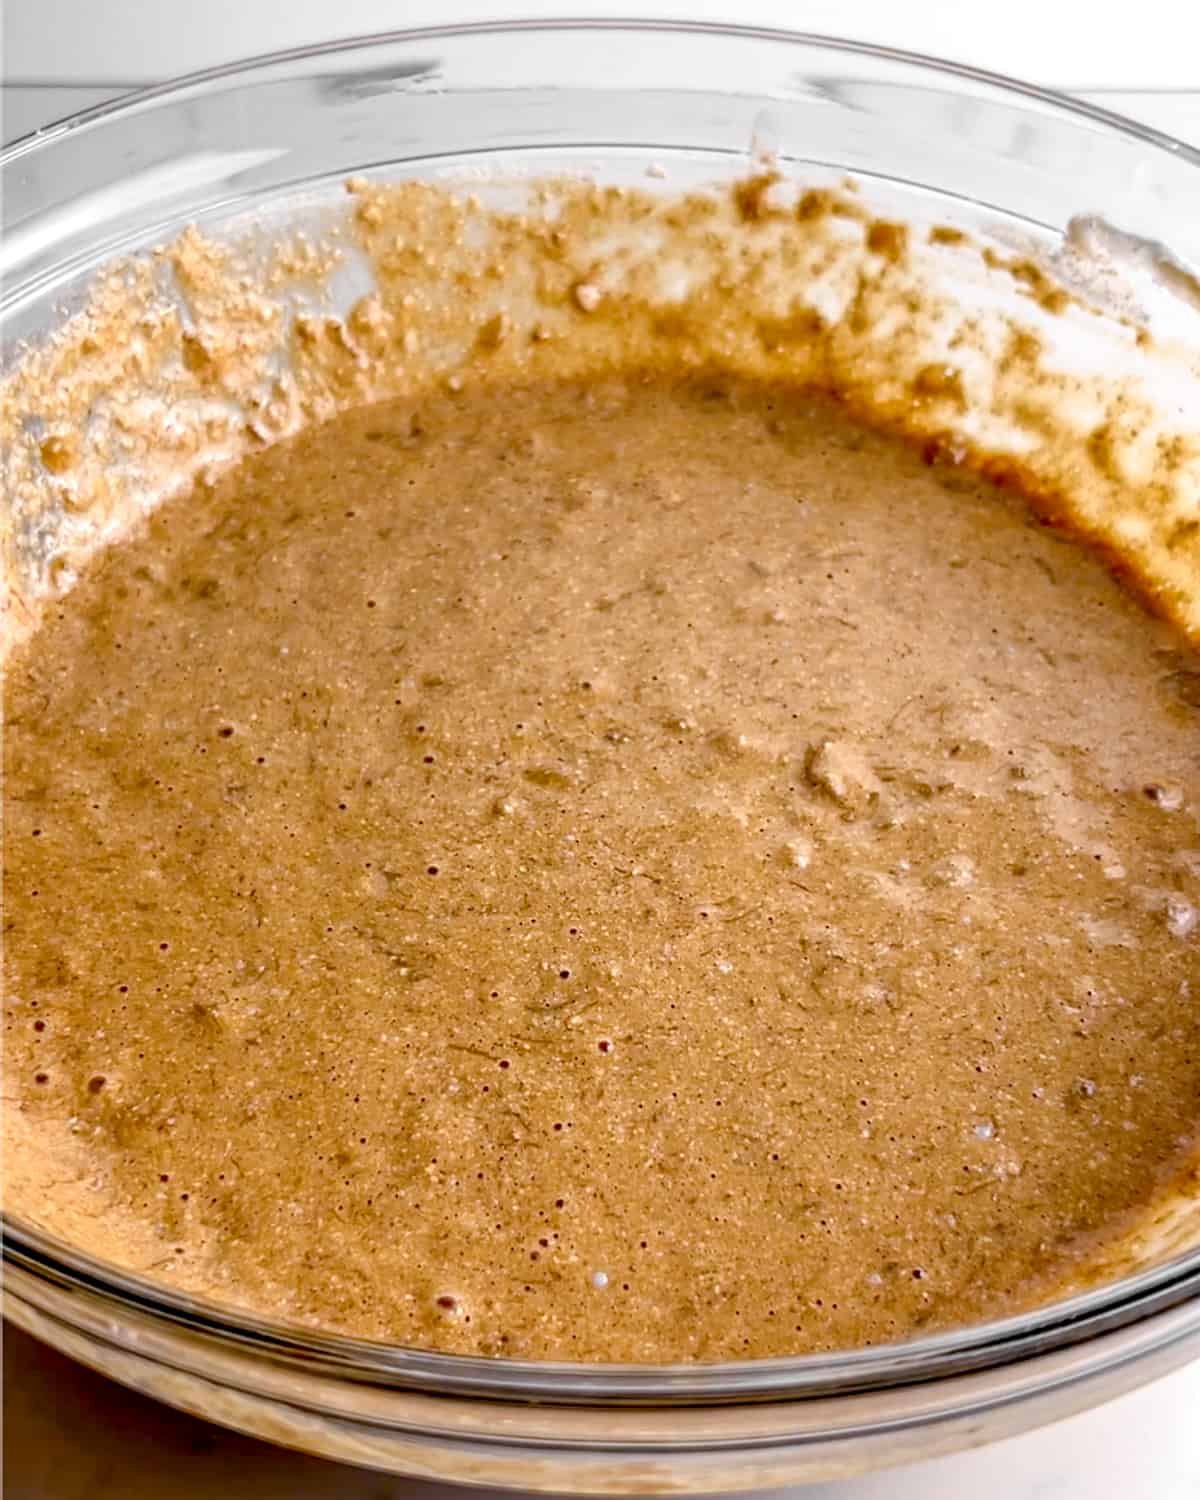 bowl of protein banana bread batter before adding nuts